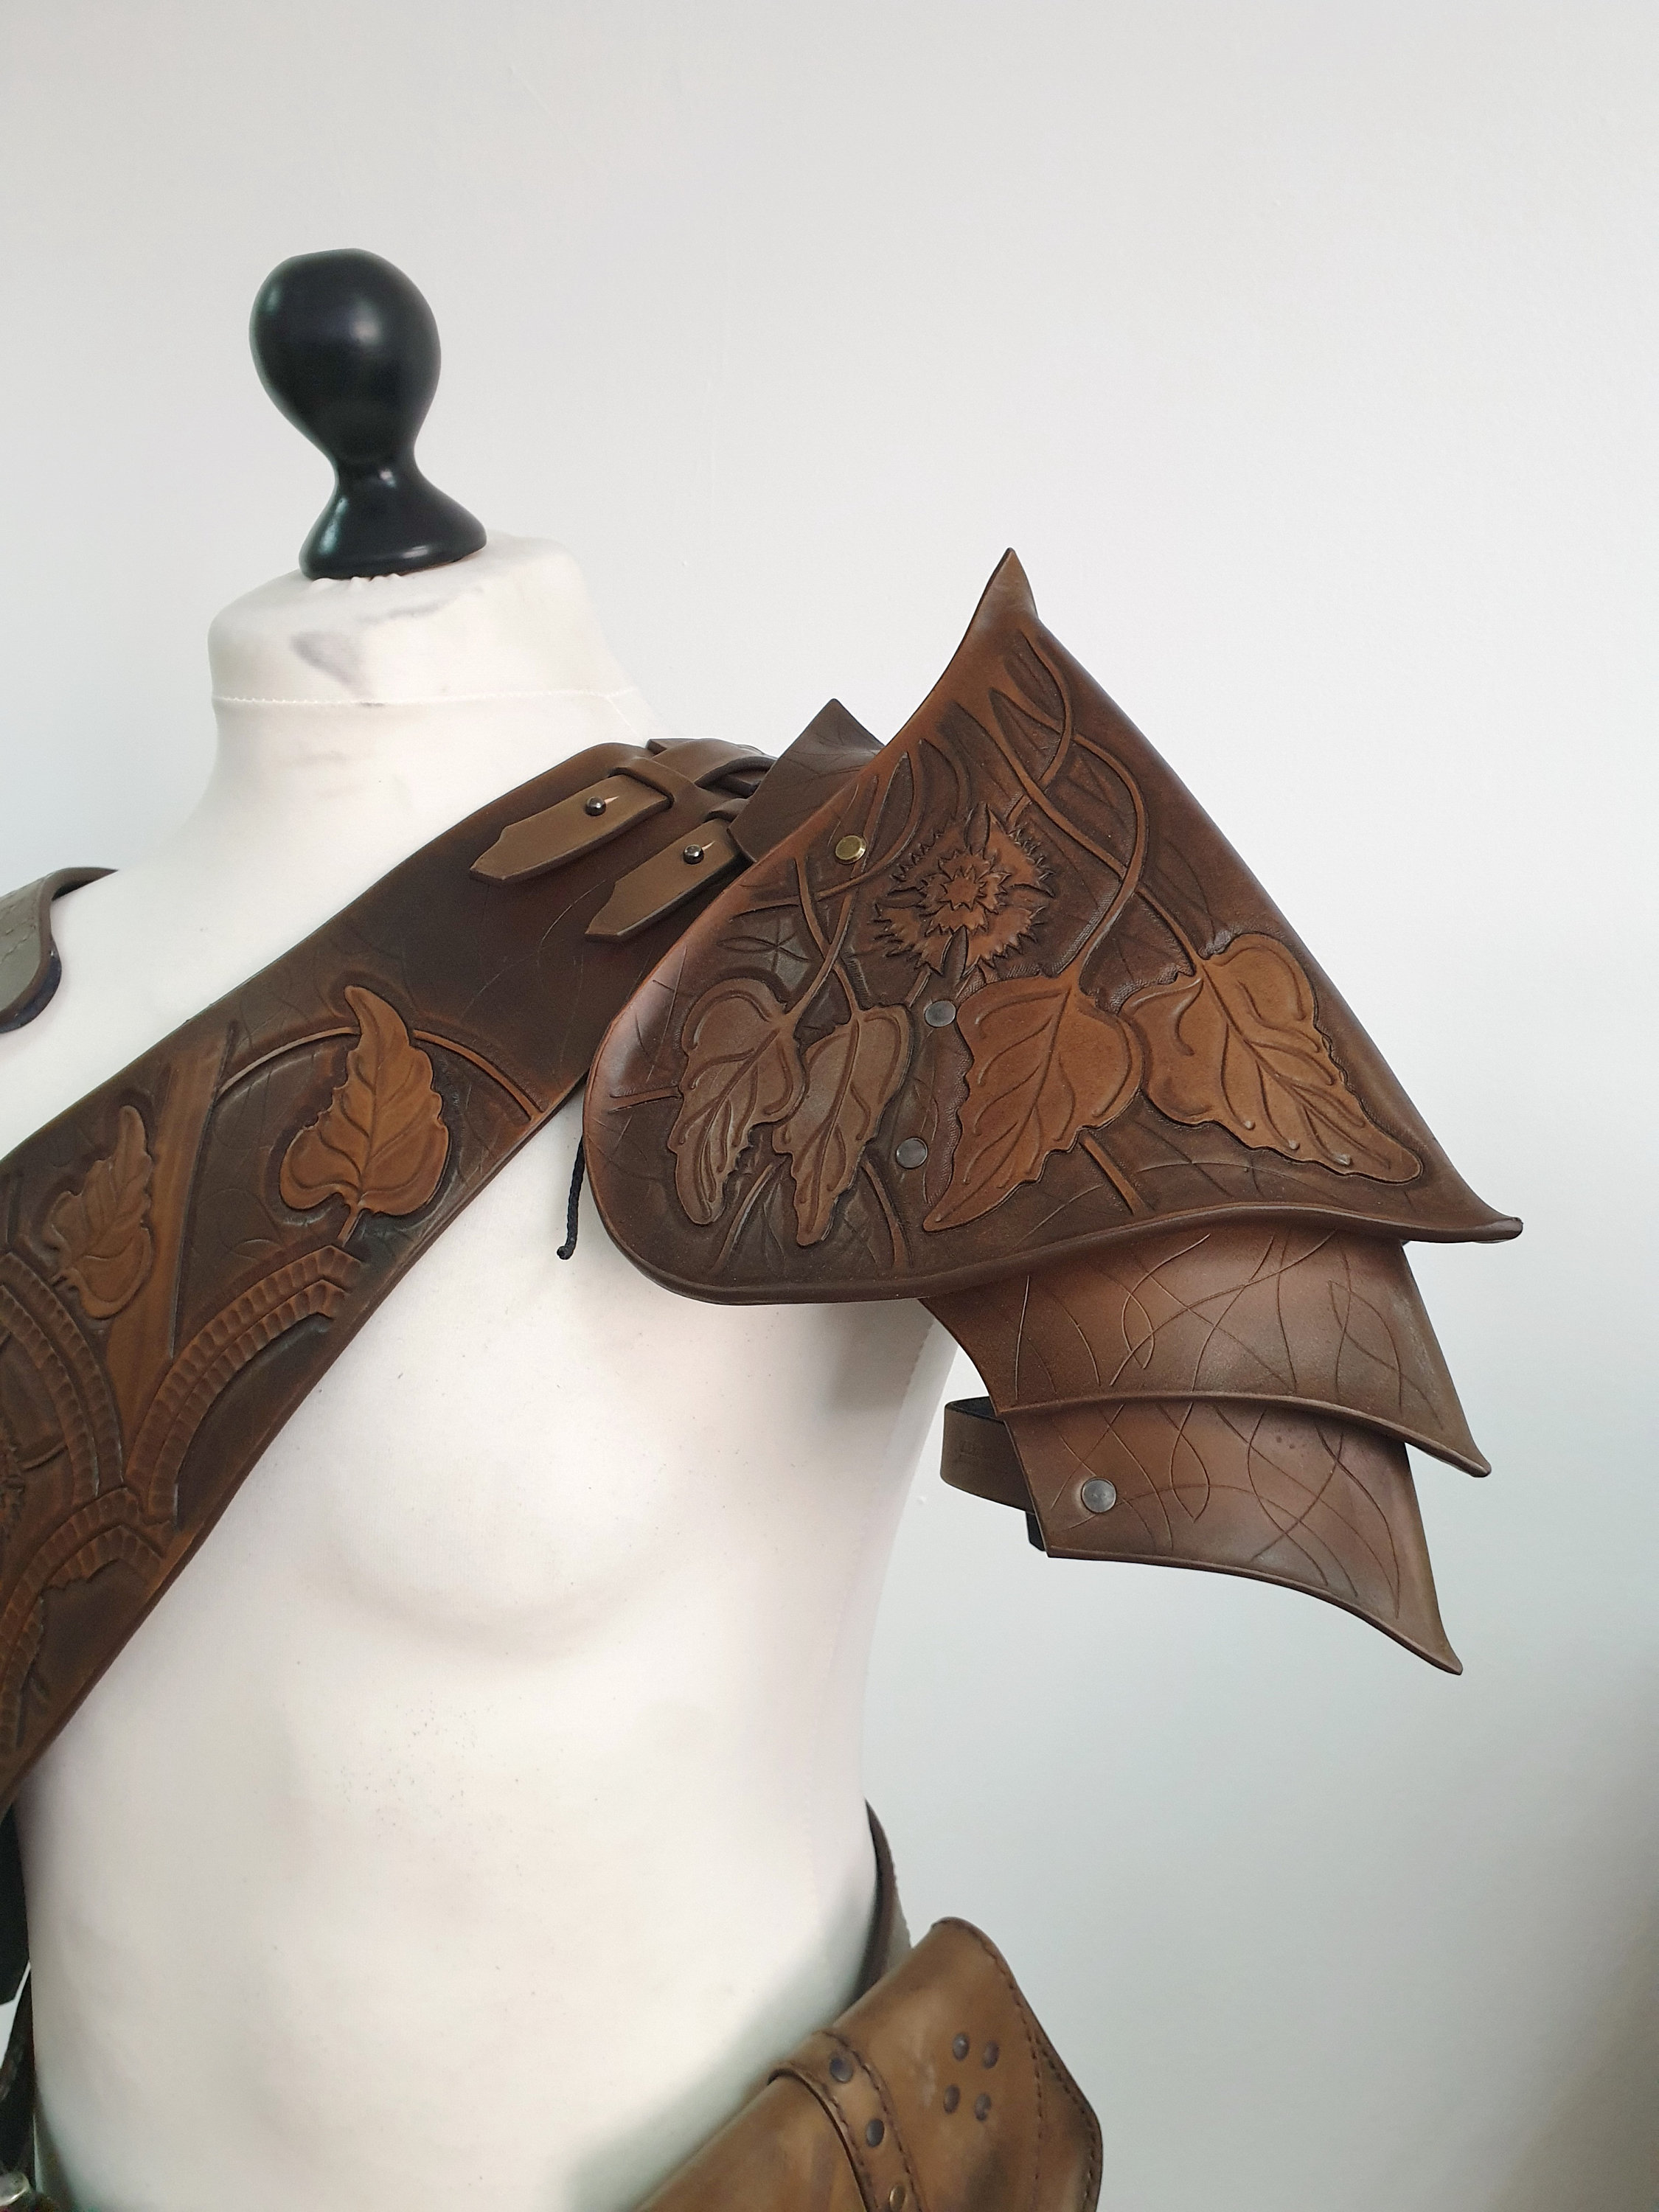 fantasy leather armor patterns